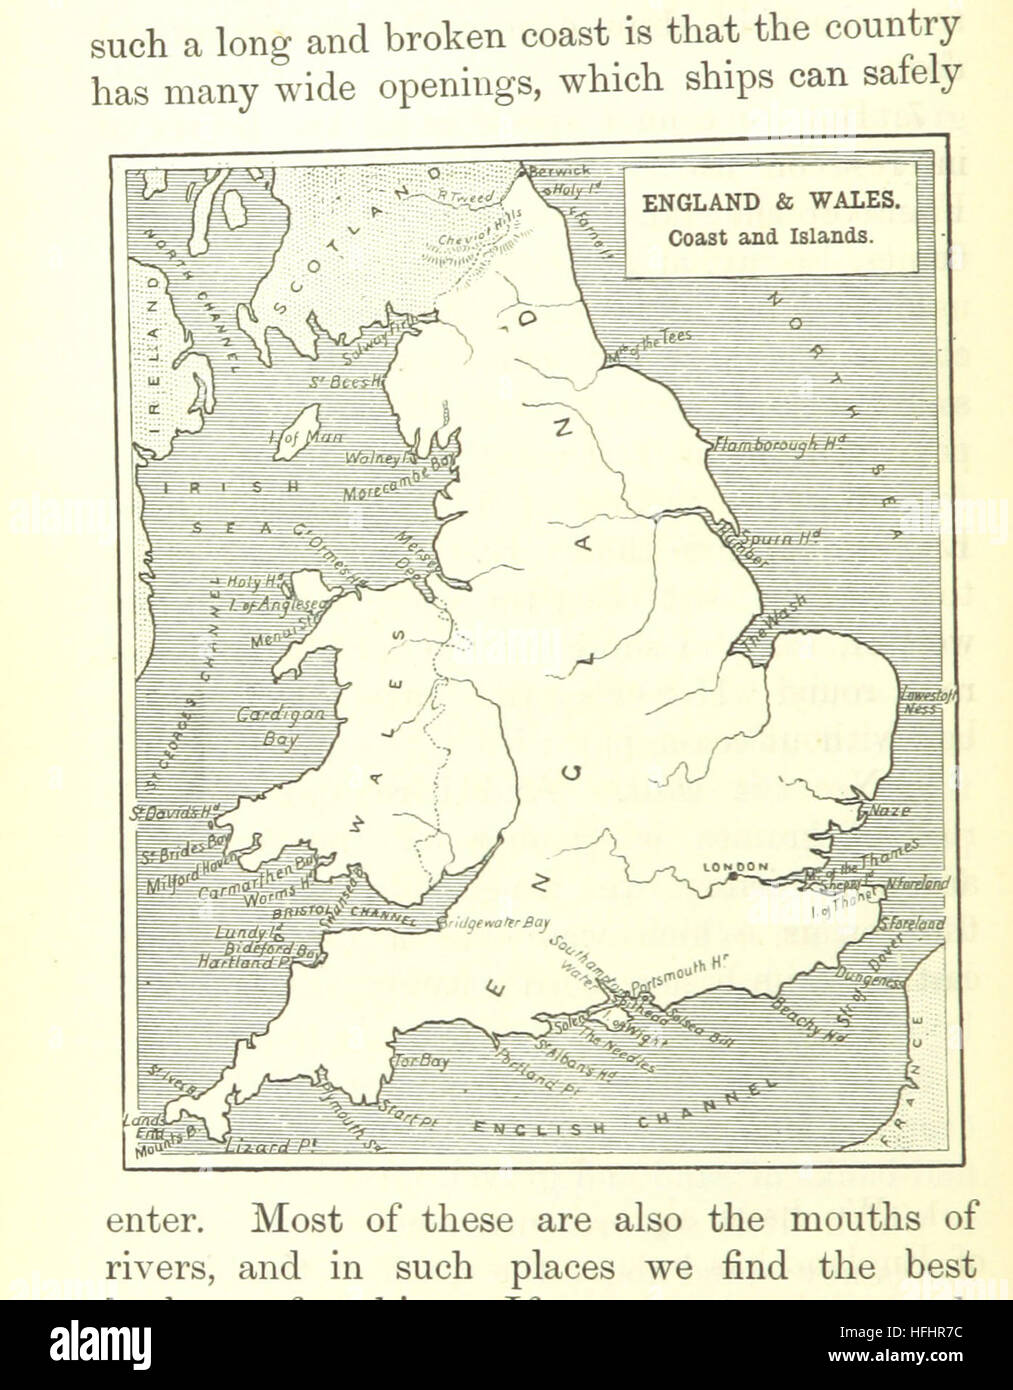 Chambers's New Geographical Readers Image taken from page 18 of 'Chambers's New Geographical Readers' Stock Photo